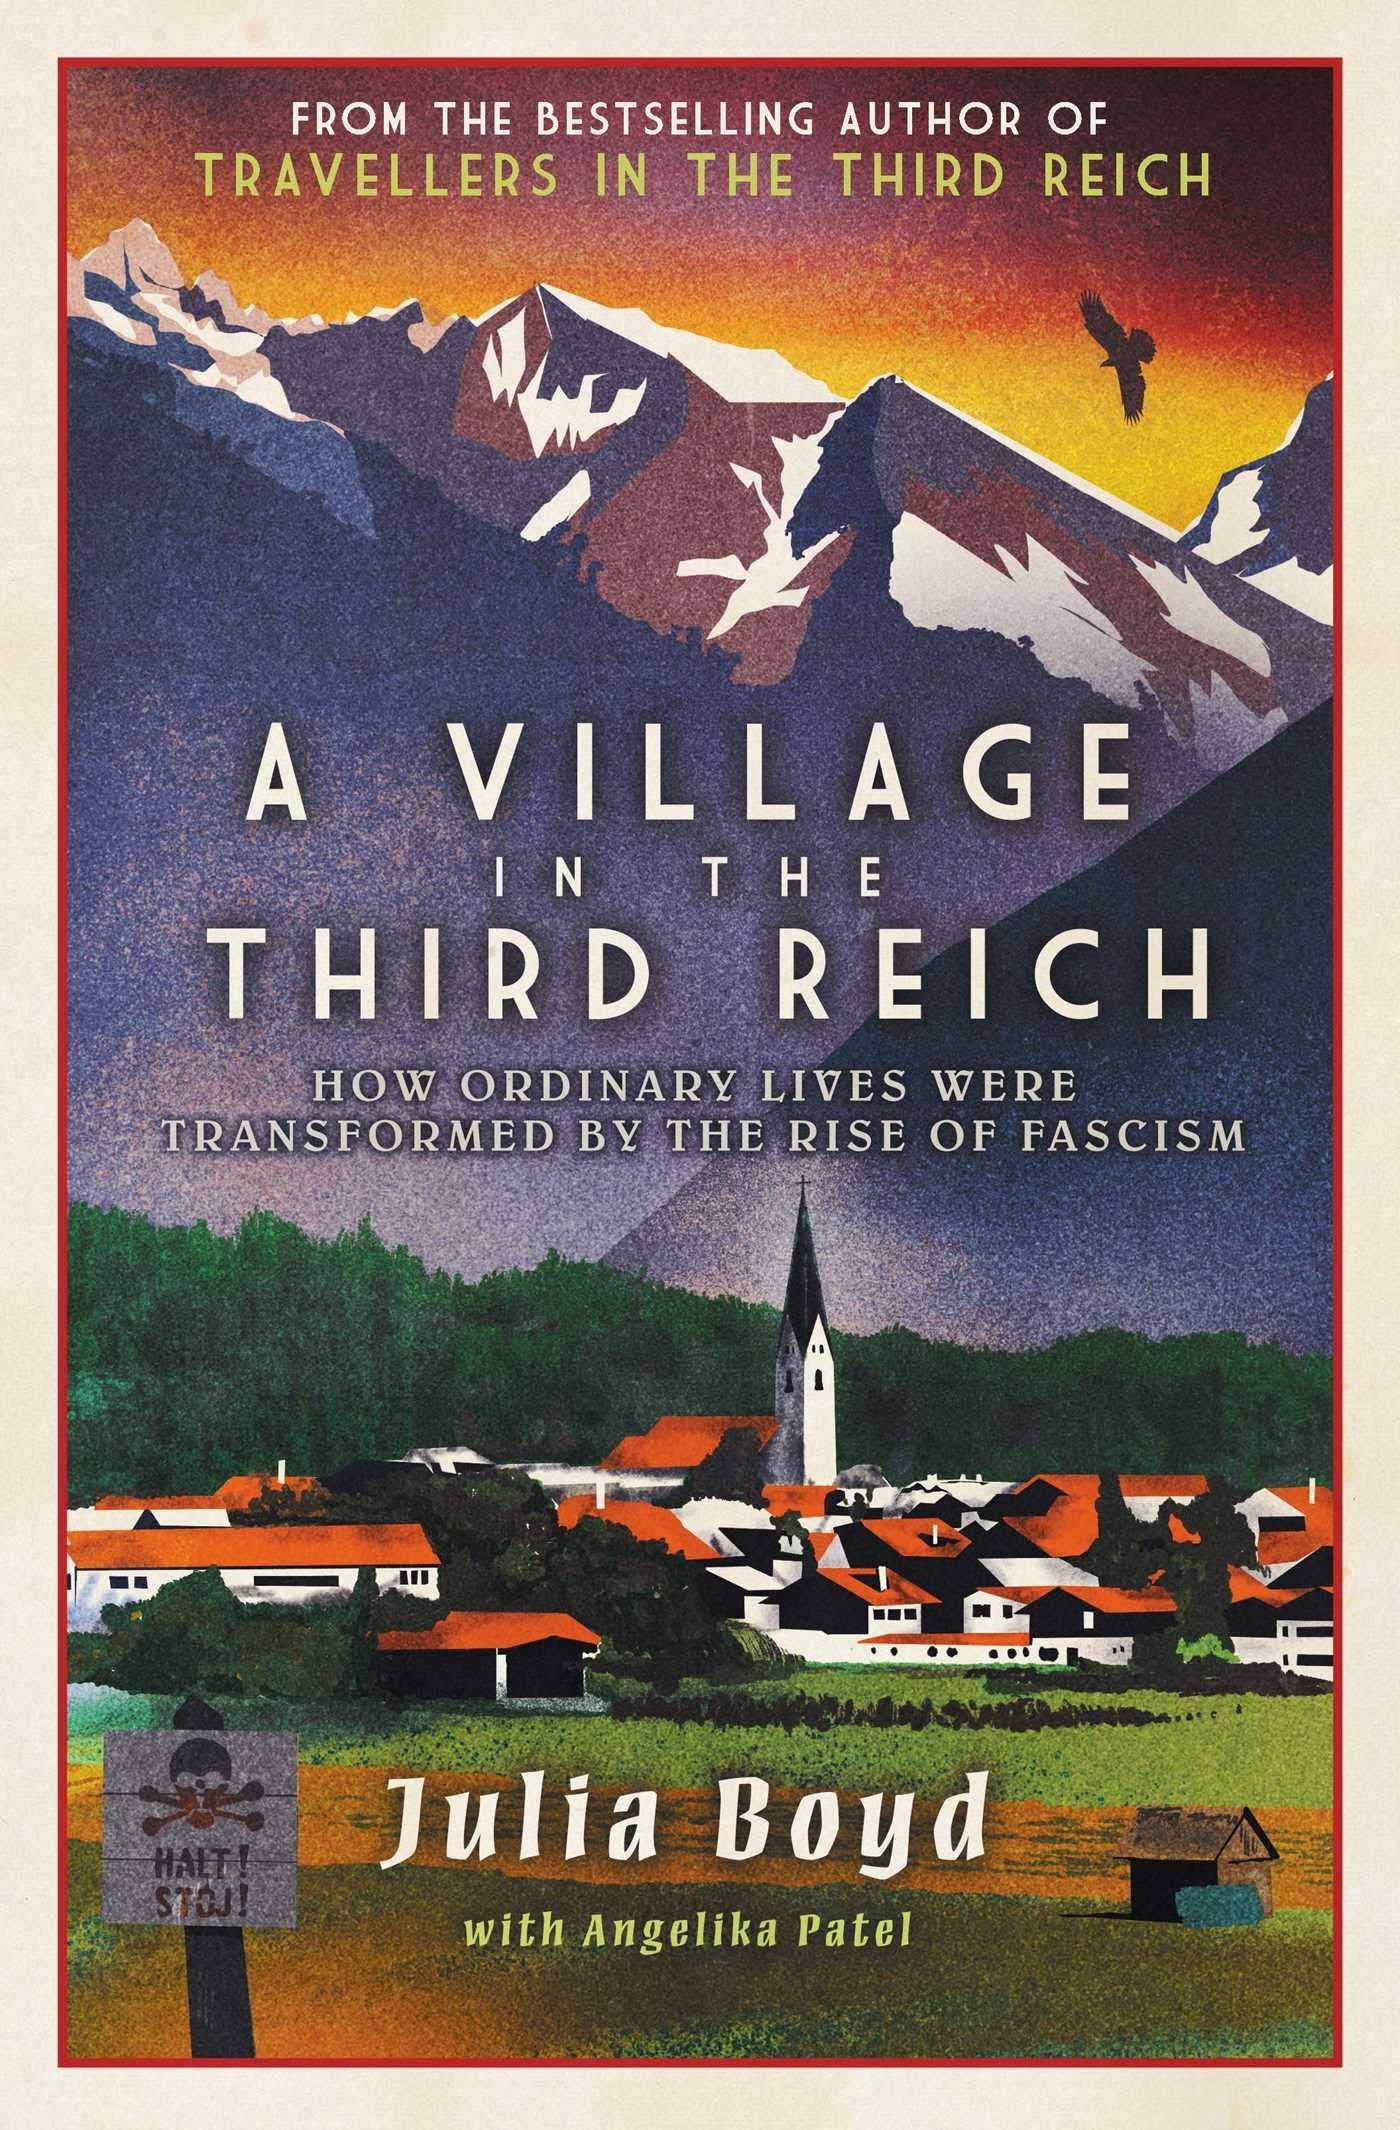 A Village in the Third Reich: How Ordinary Lives Were Transformed by the Rise of Fascism [Book]